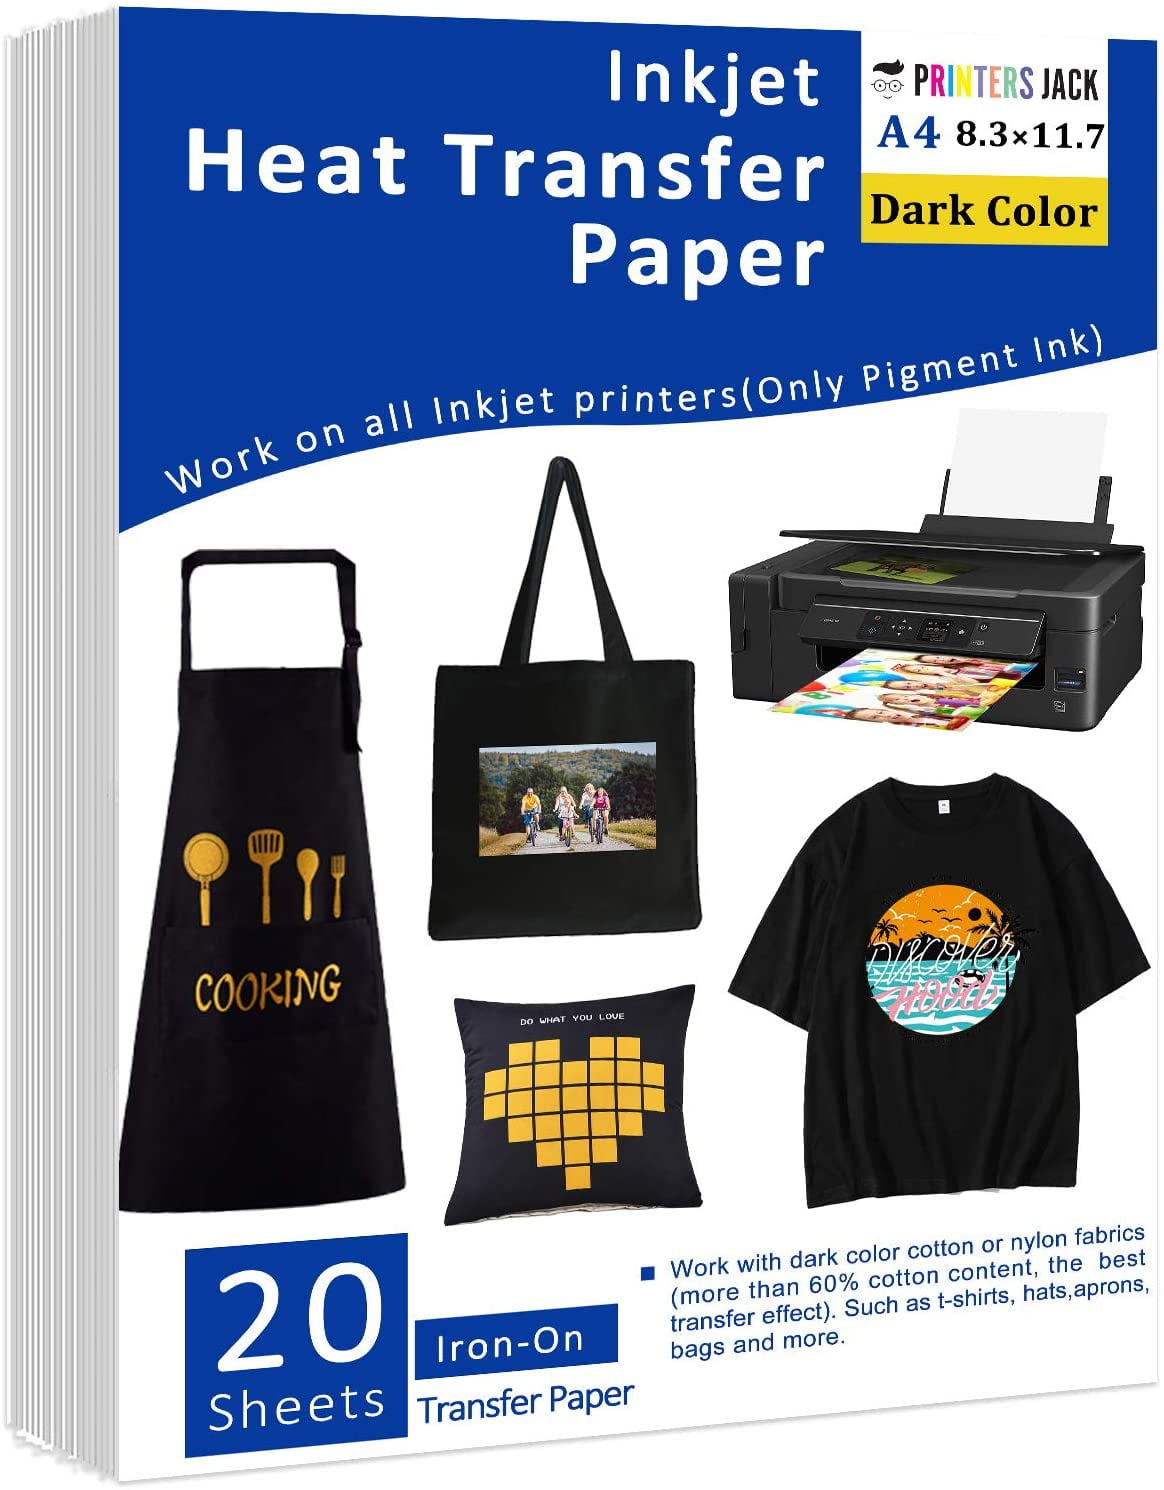 Printers Jack Iron-On Dark Color Heat Transfer Paper 8.3x11.7 inch - 10 Sheets